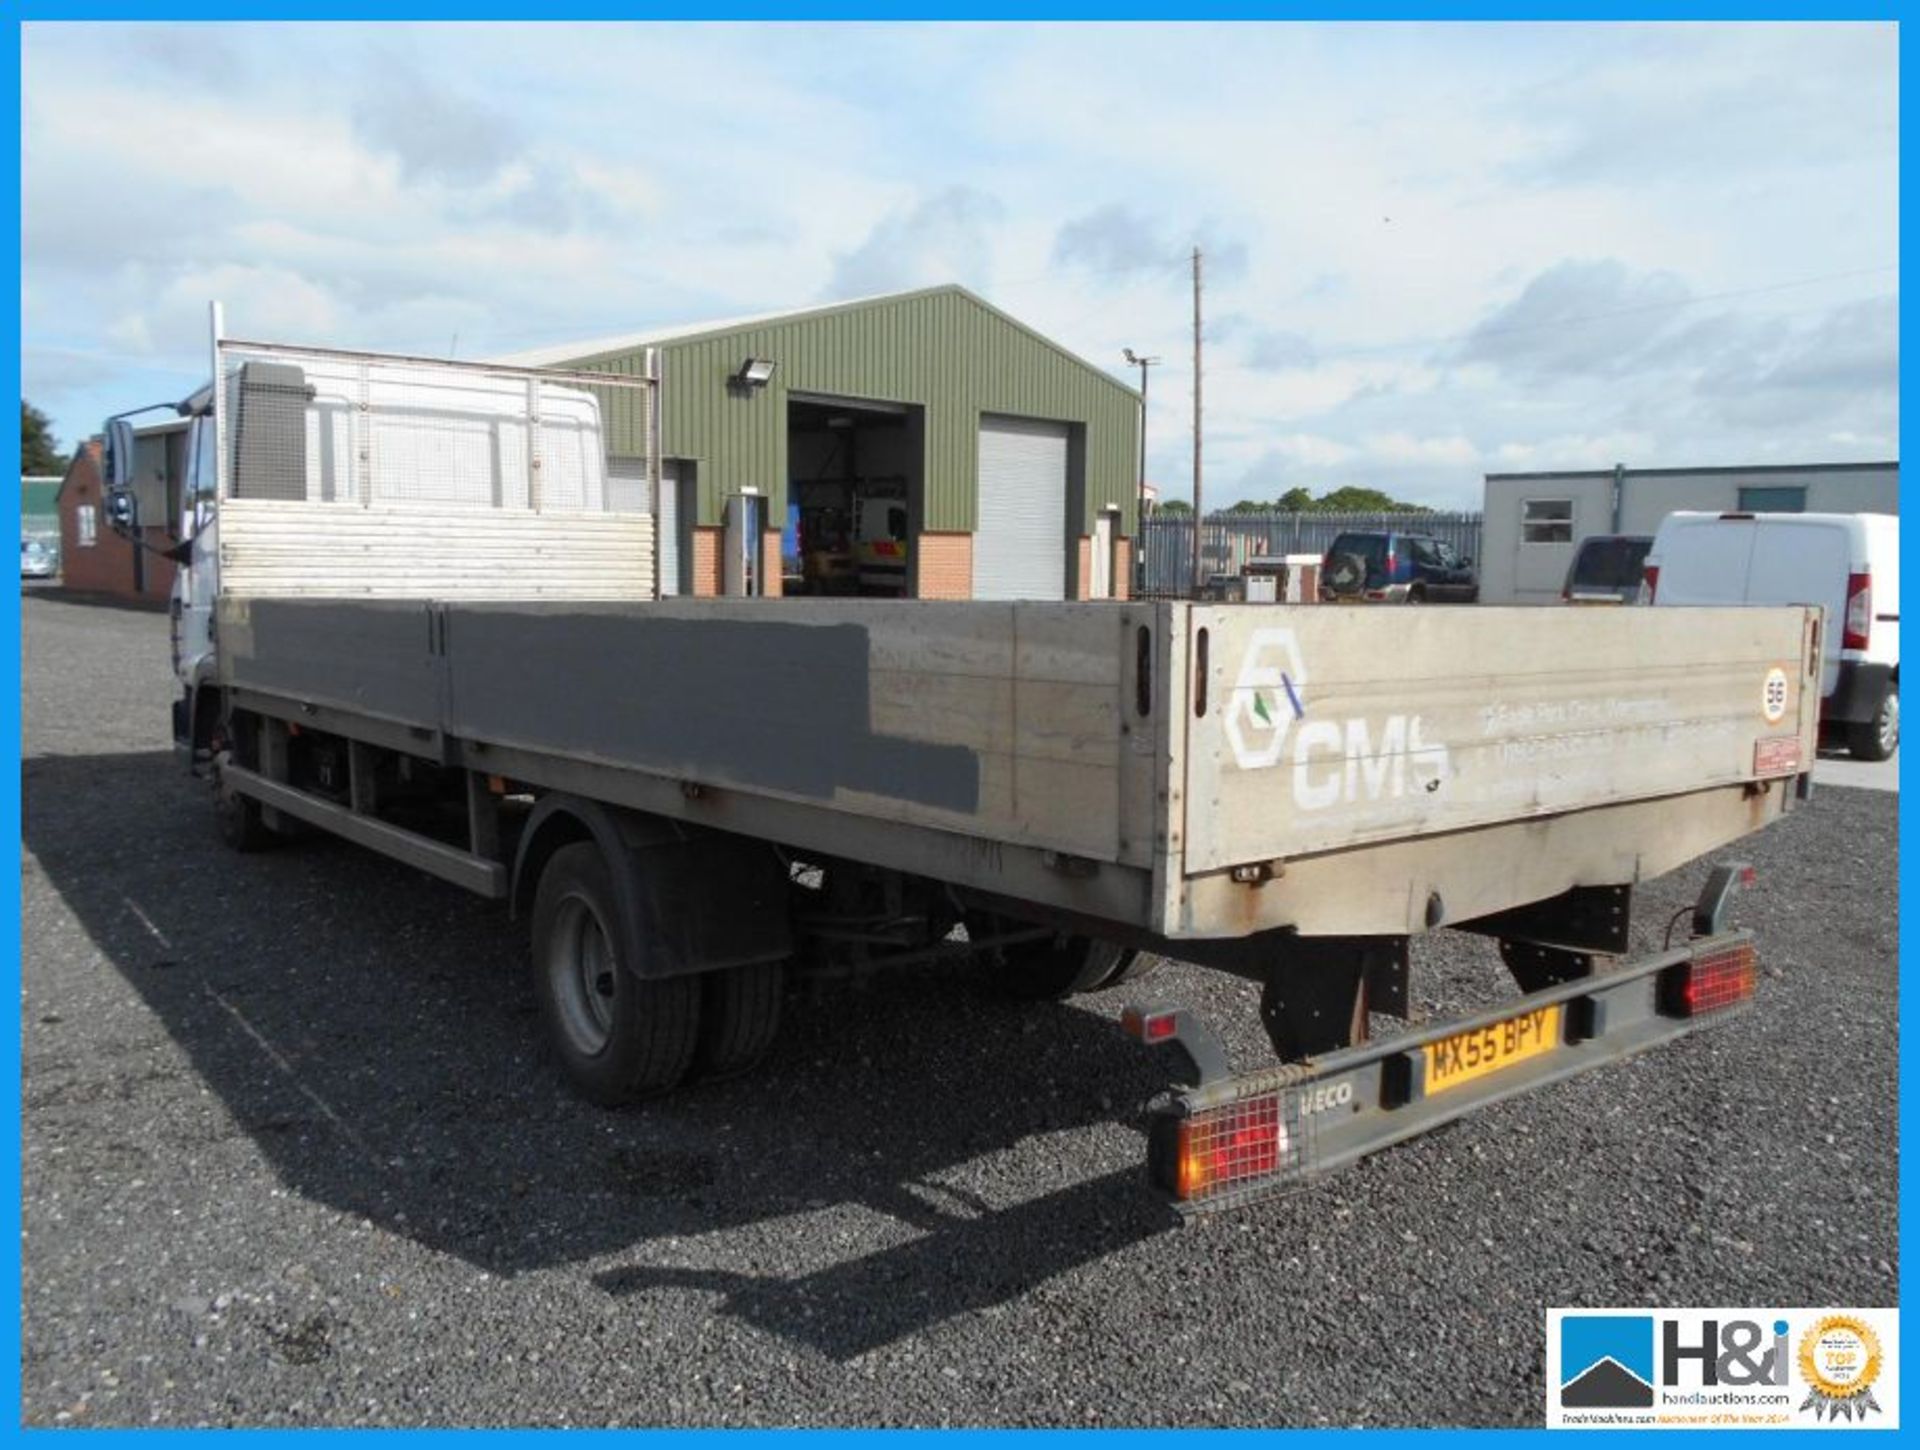 2005 '55' REG. IVECO FORD EURO CARGO 75E17. 20ft ALLOY DROPSIDE BODY. 566,500km. 2 OWNERS. MANUAL - Image 3 of 12